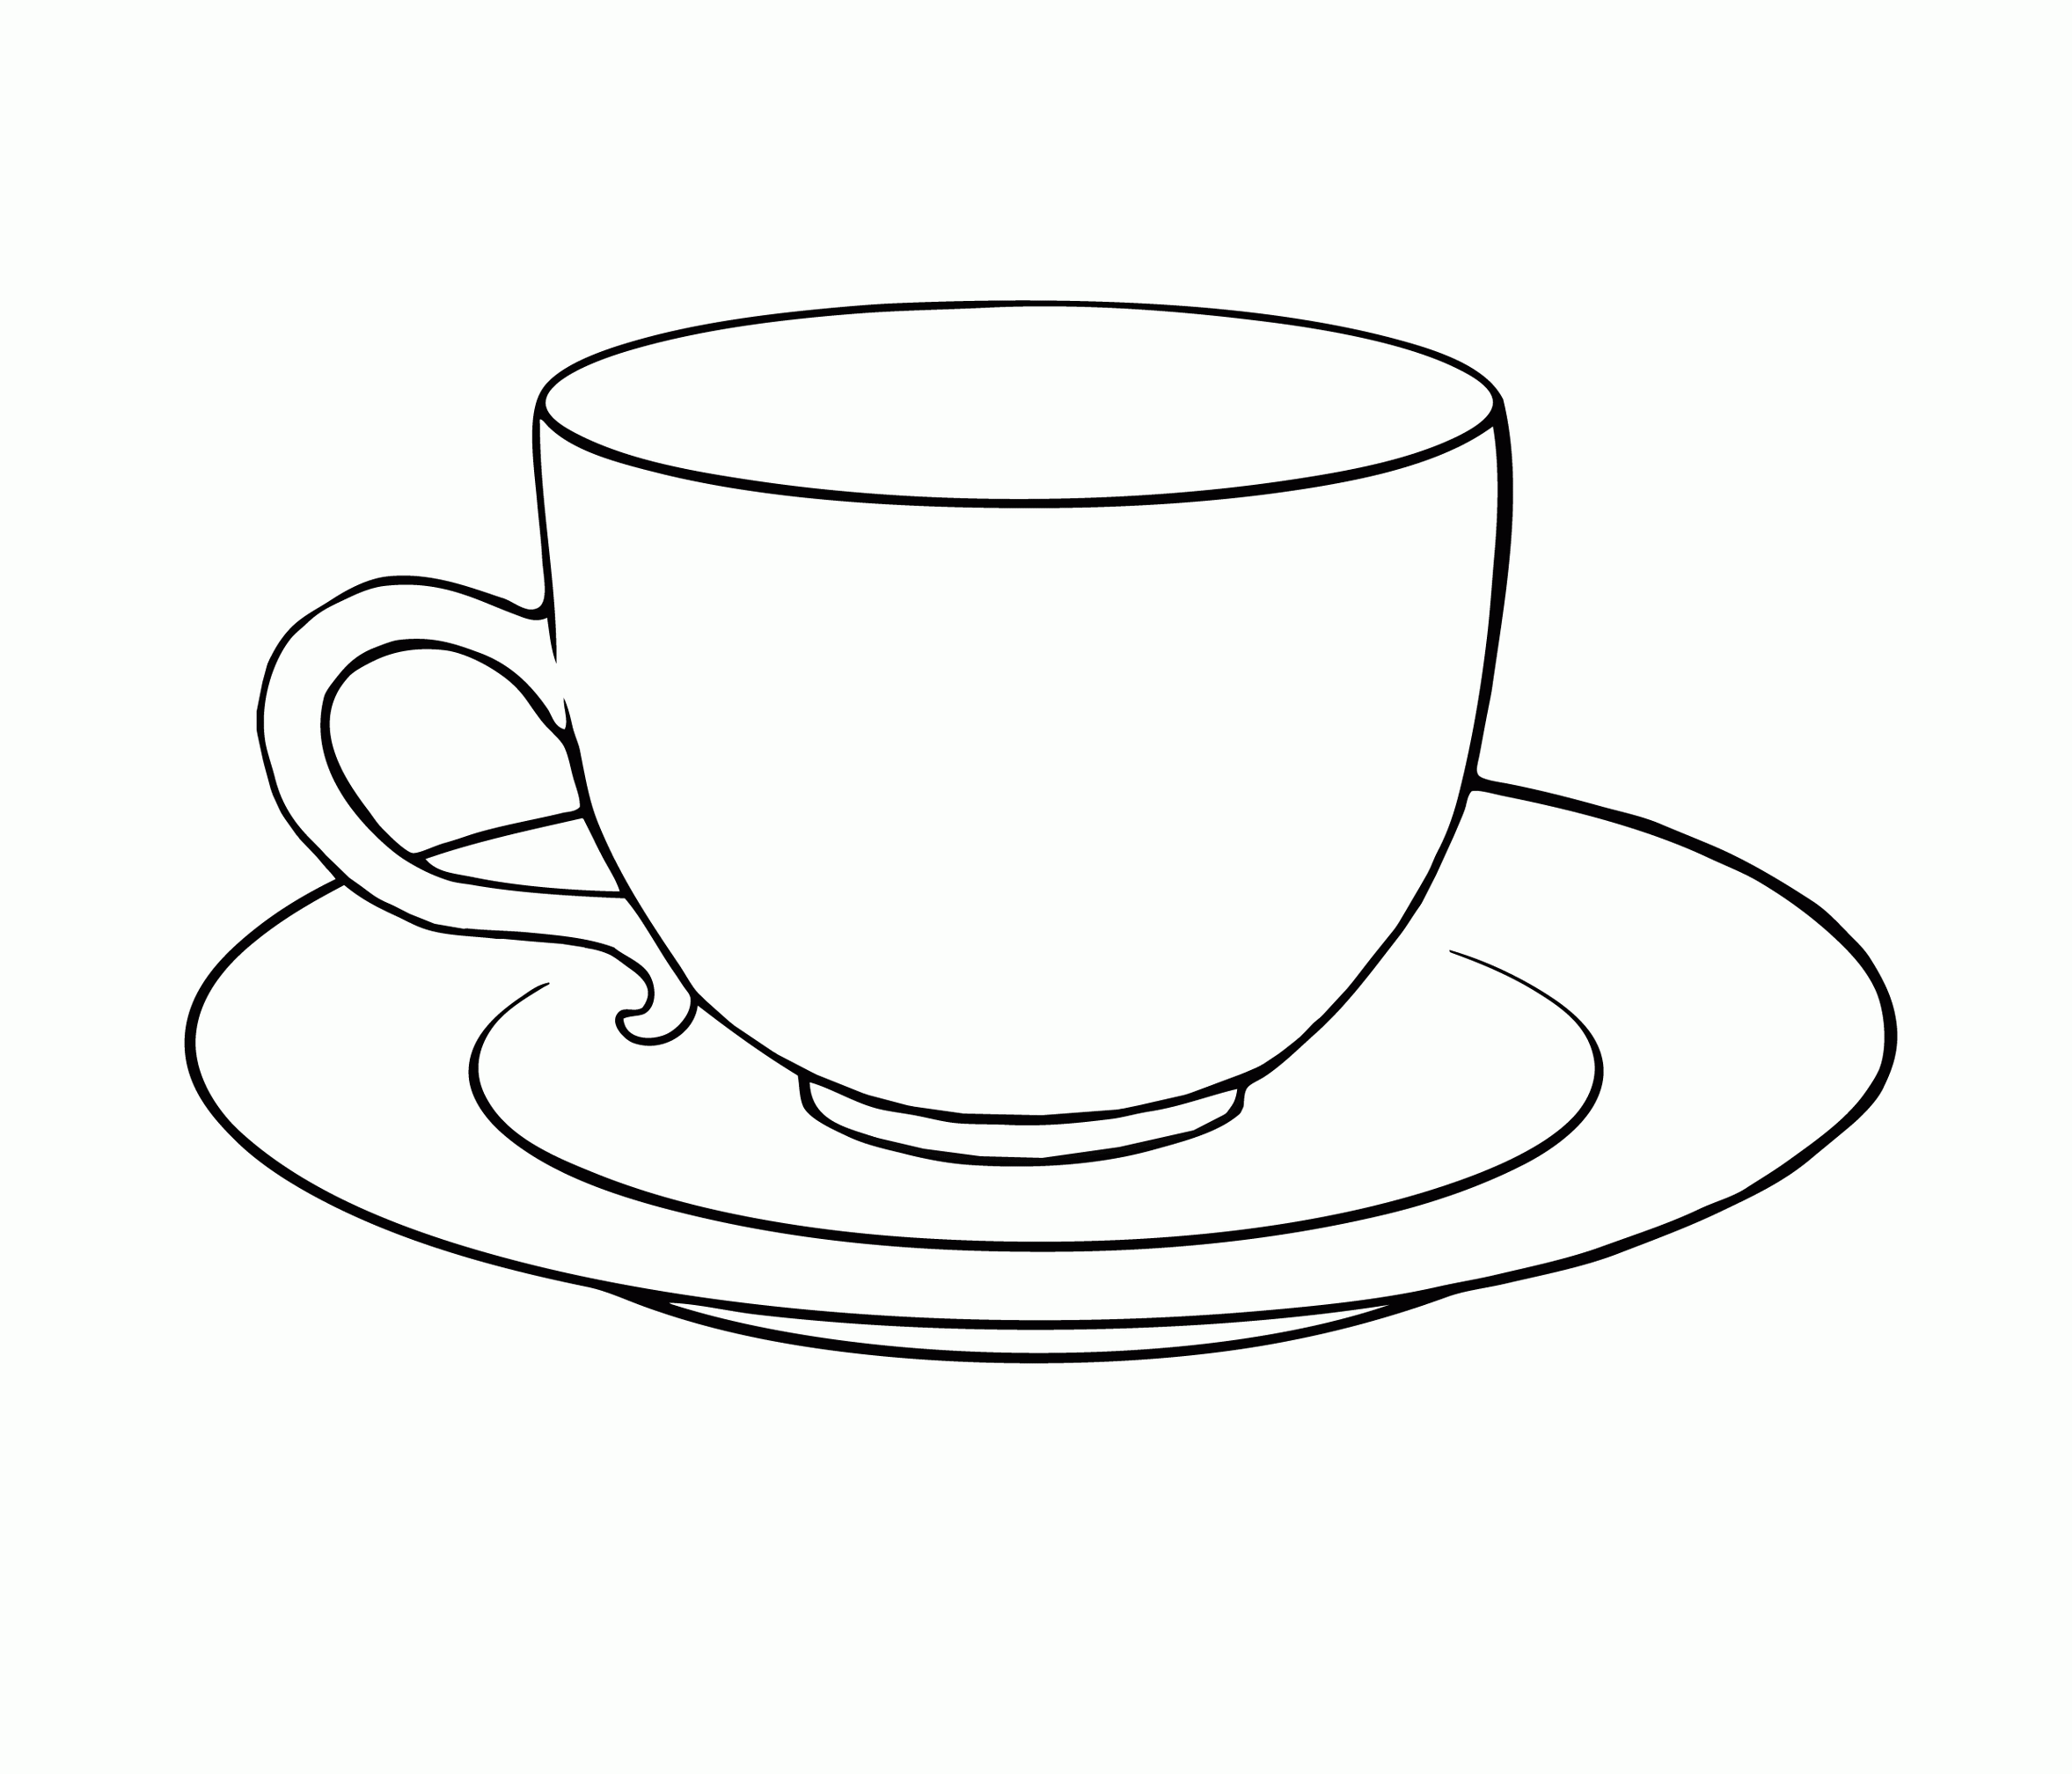 Tea Cup Colouring Page Clipart - Free to use Clip Art Resource